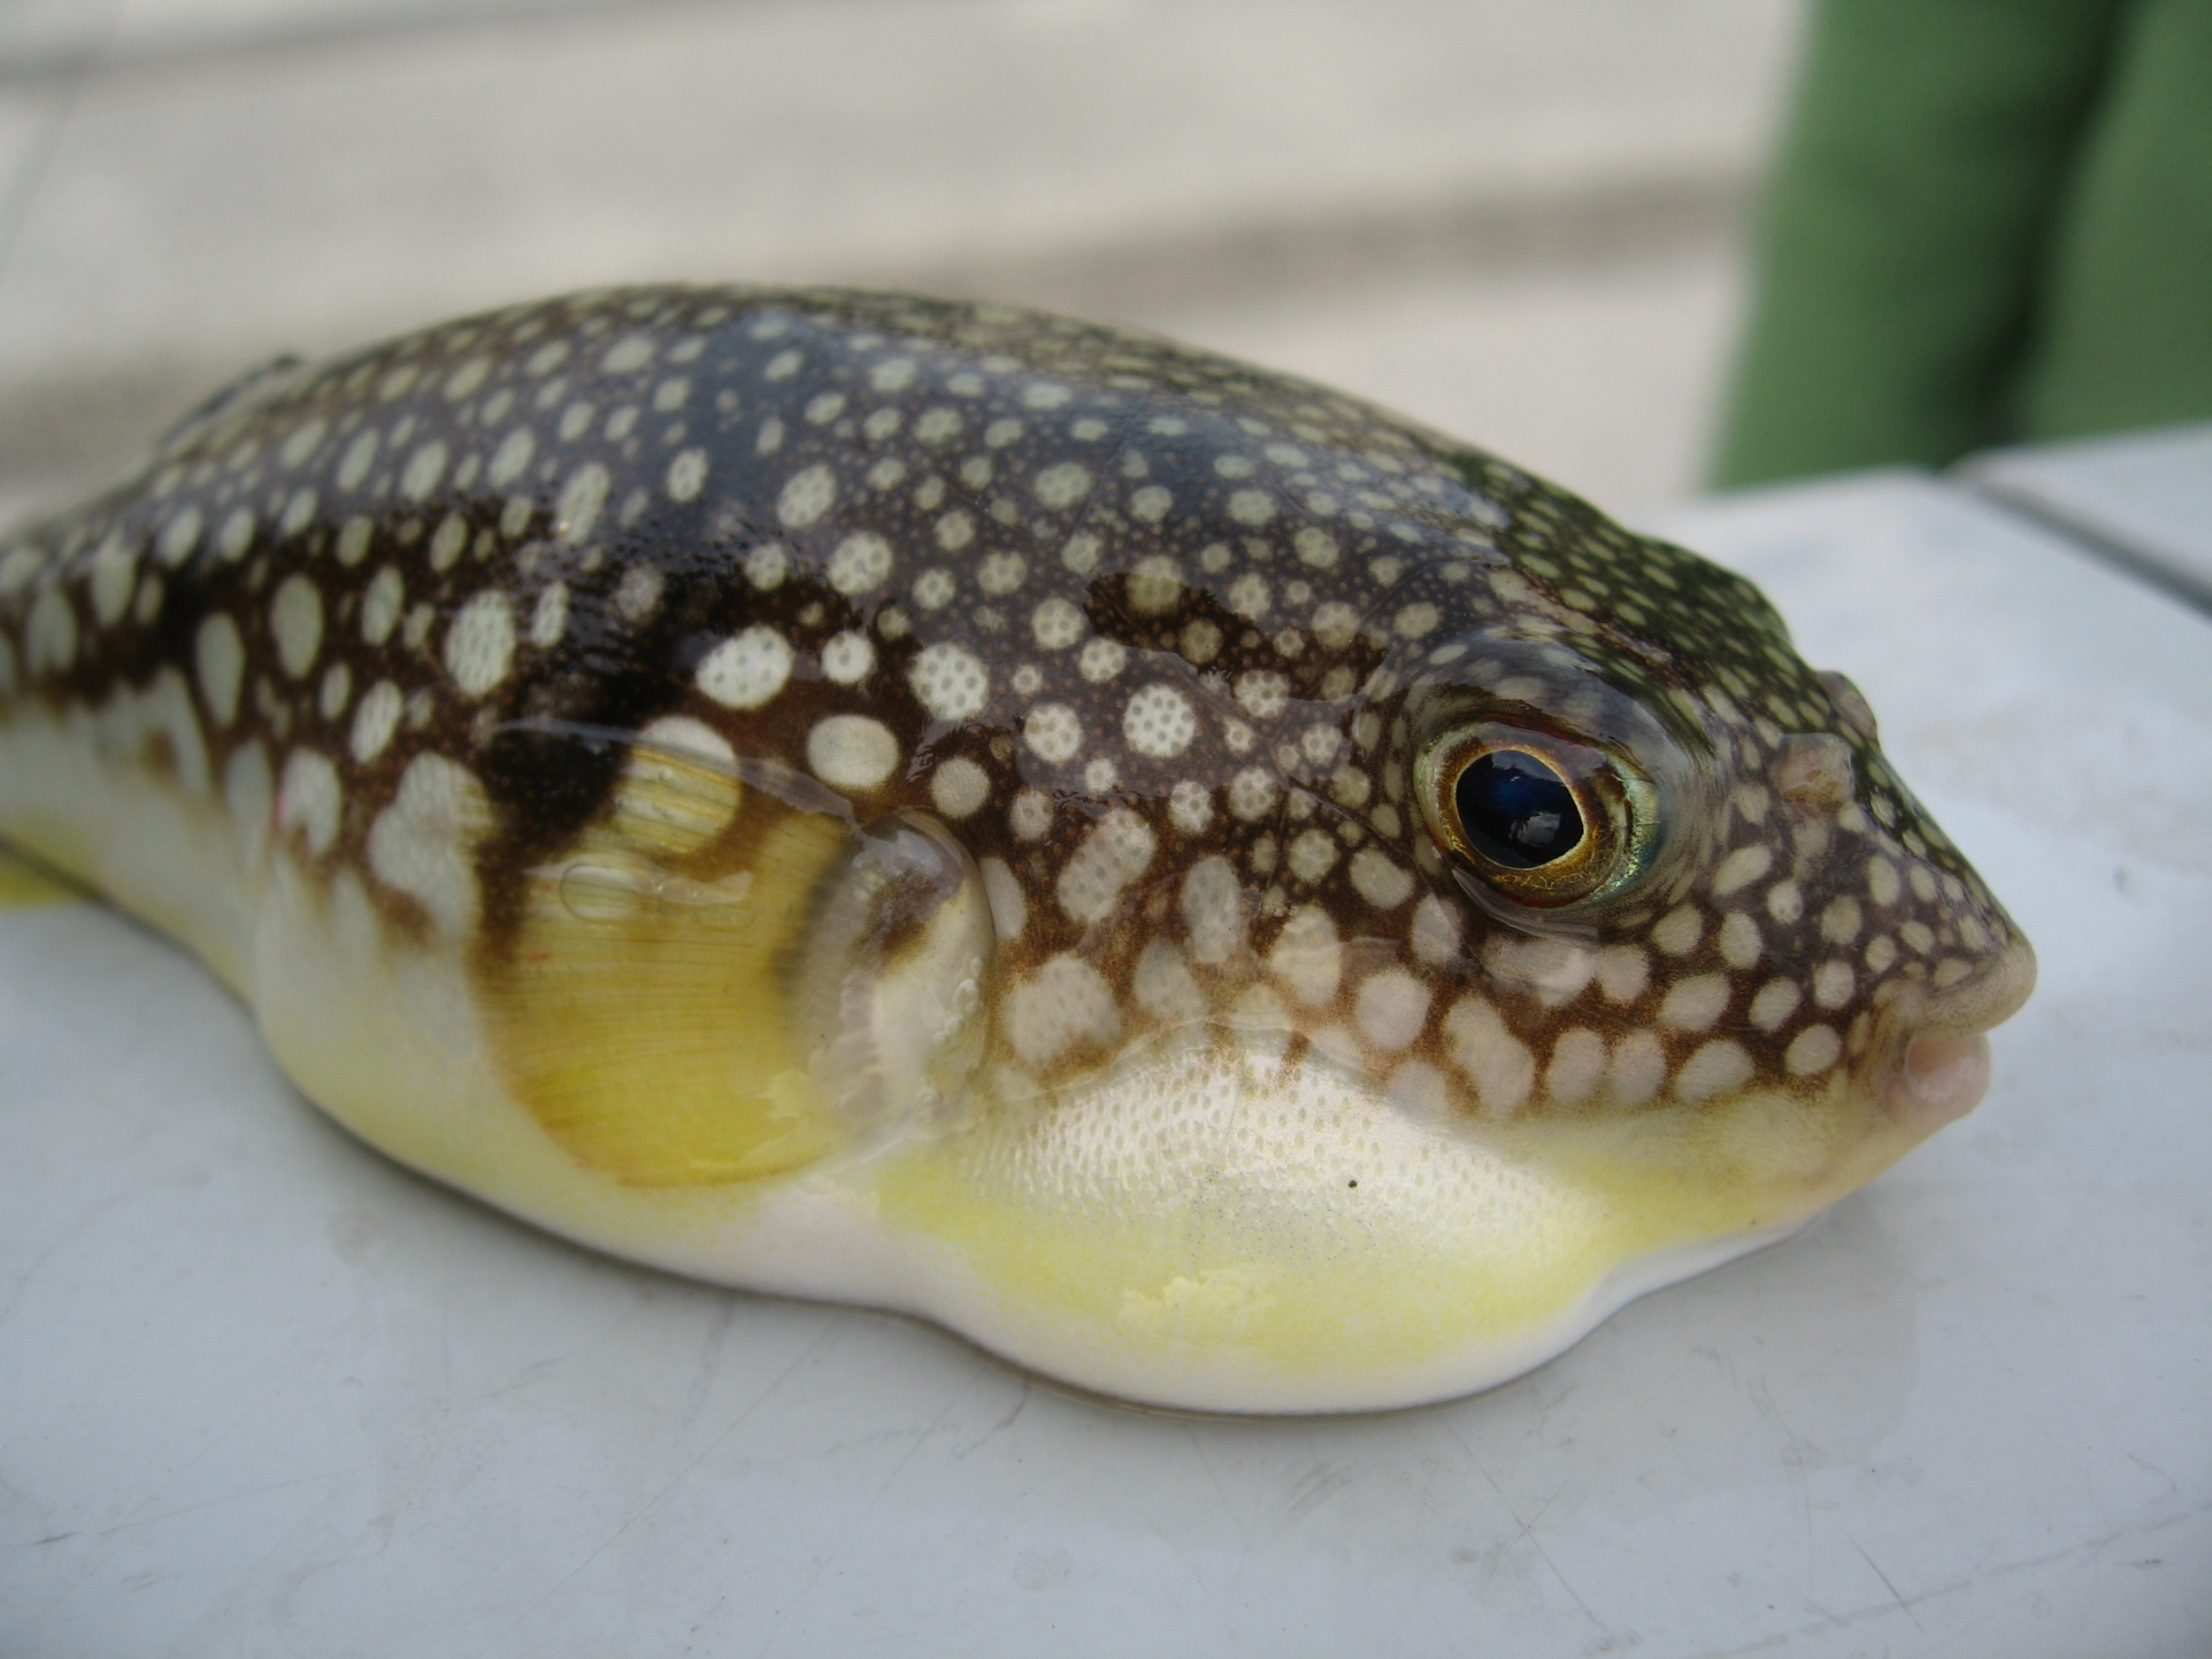 Banned: It is illegal to sell, harvest, or serve puffer fish in the U.S. without a license. Sale and consumption are strictly prohibited in the European Union.